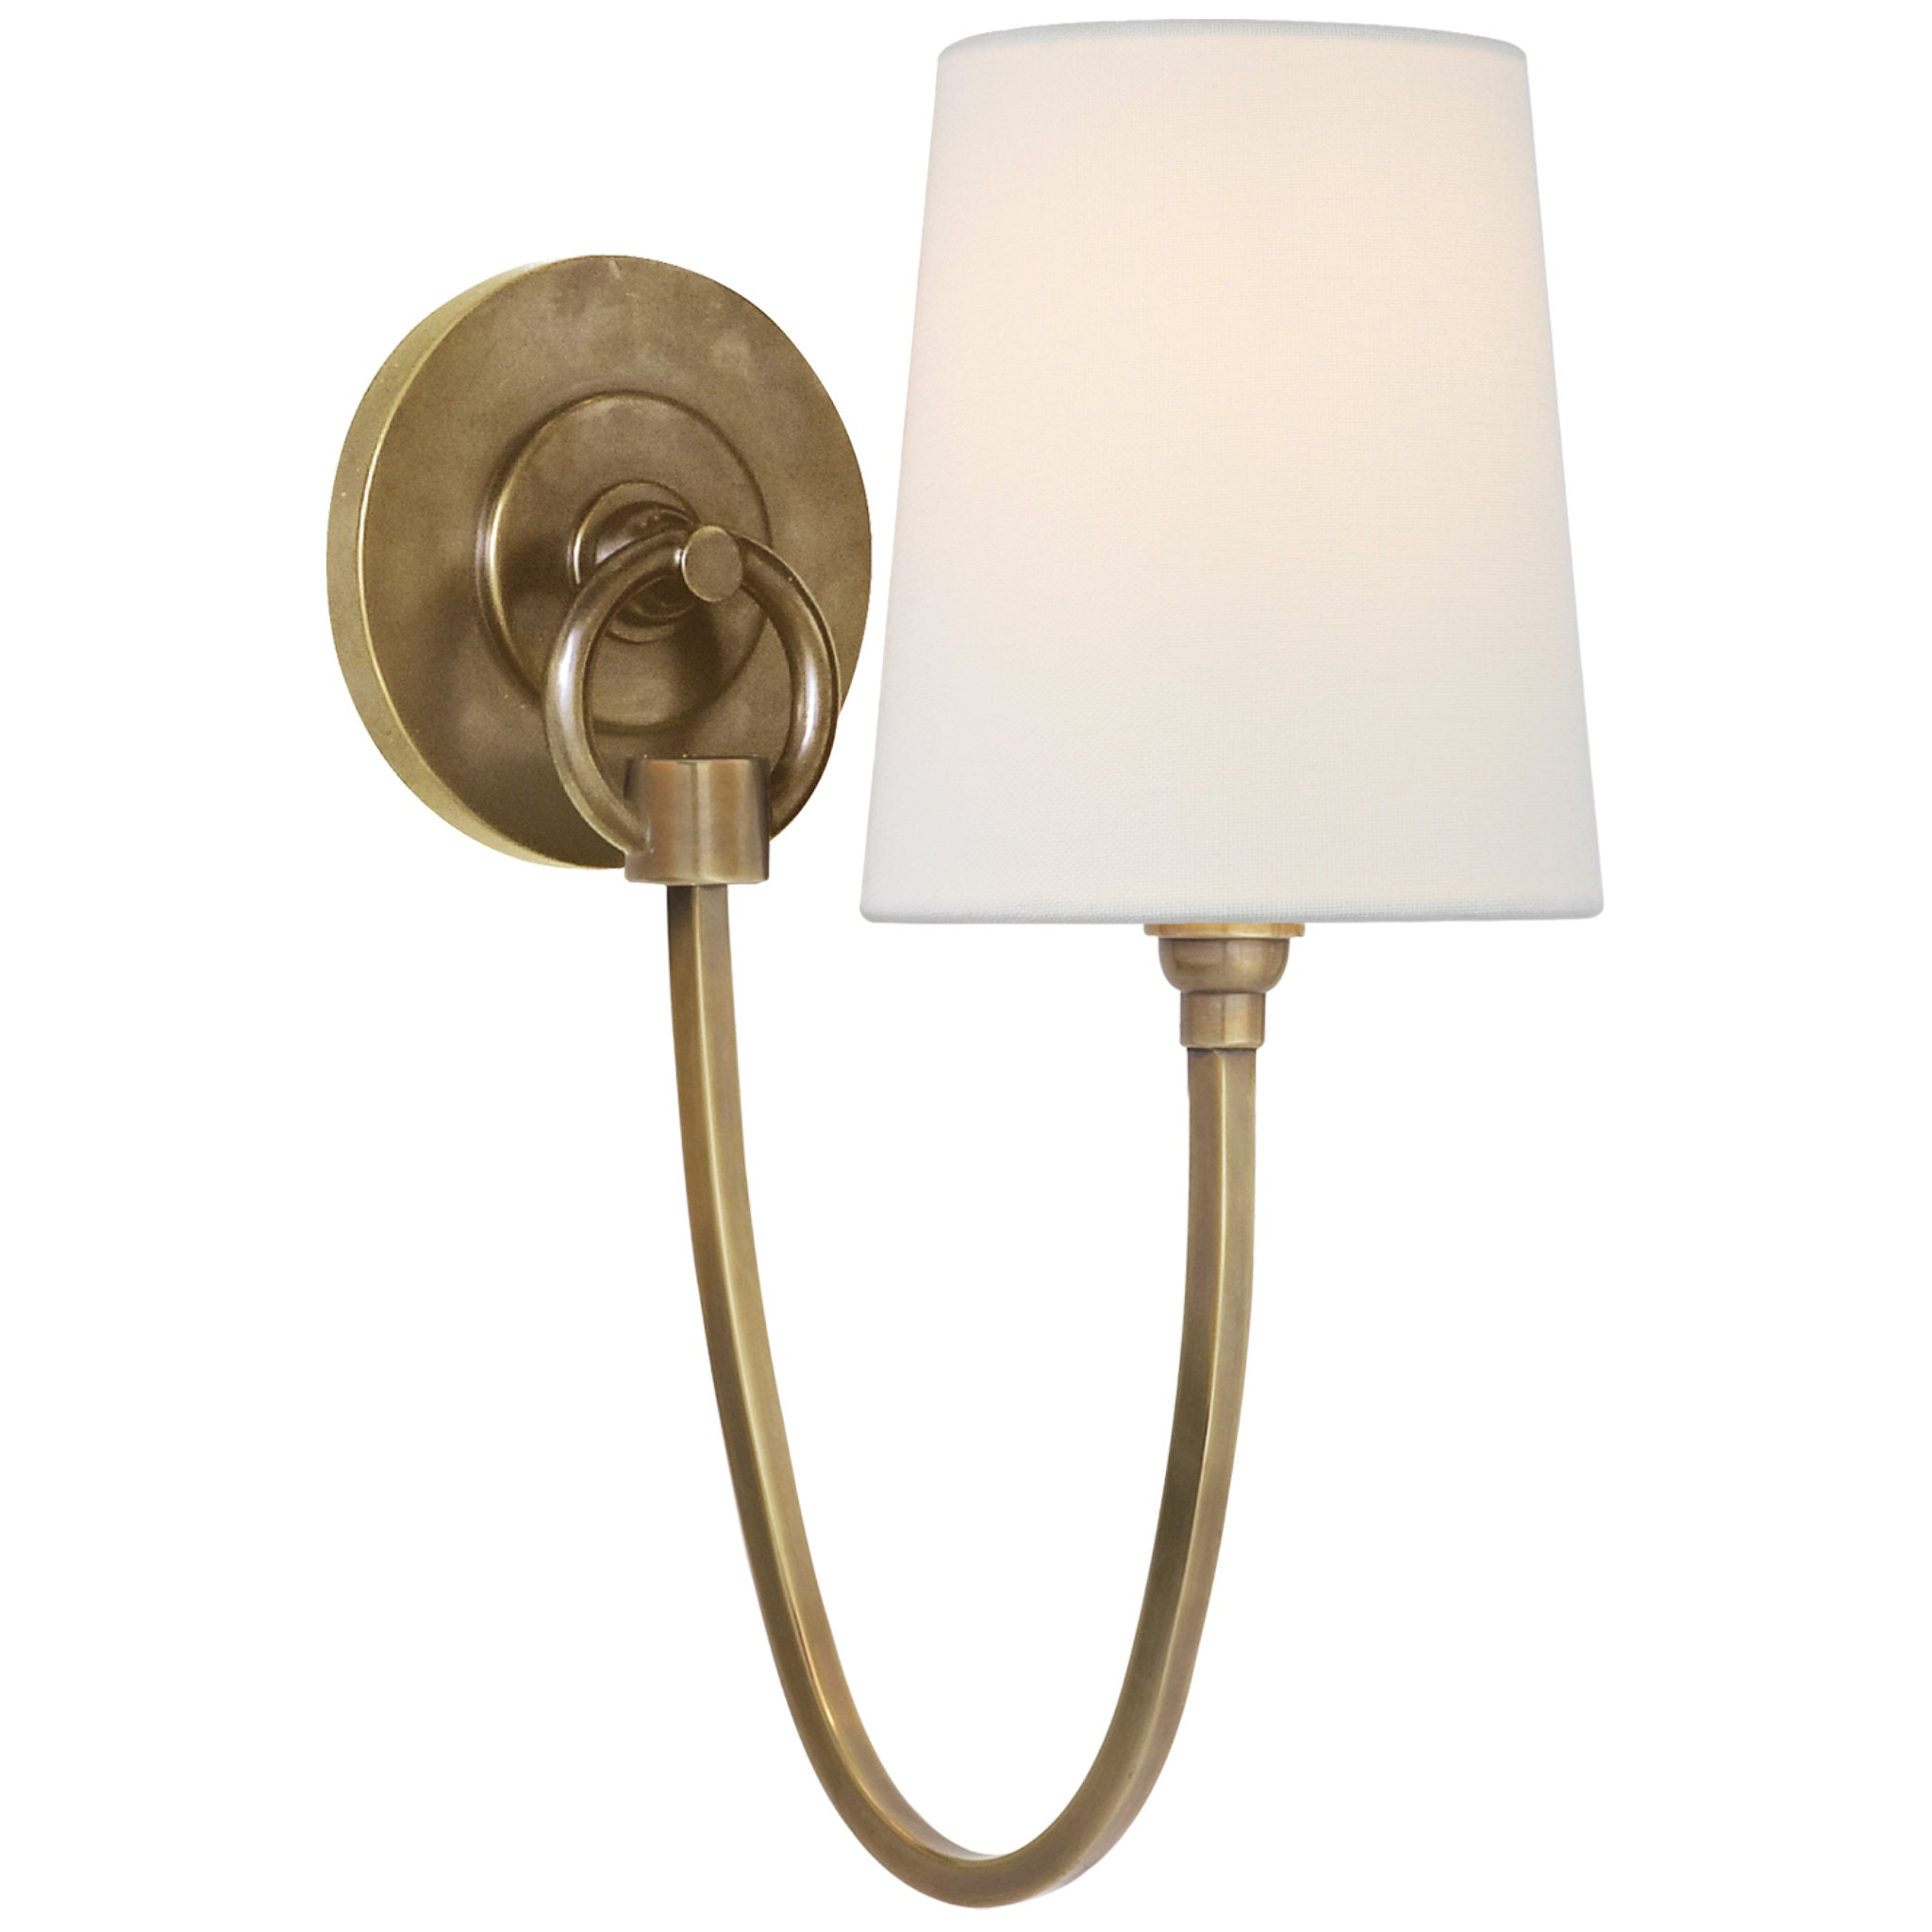 Thomas O'Brien Reed Single Sconce in Hand-Rubbed Antique Brass with Linen Shade